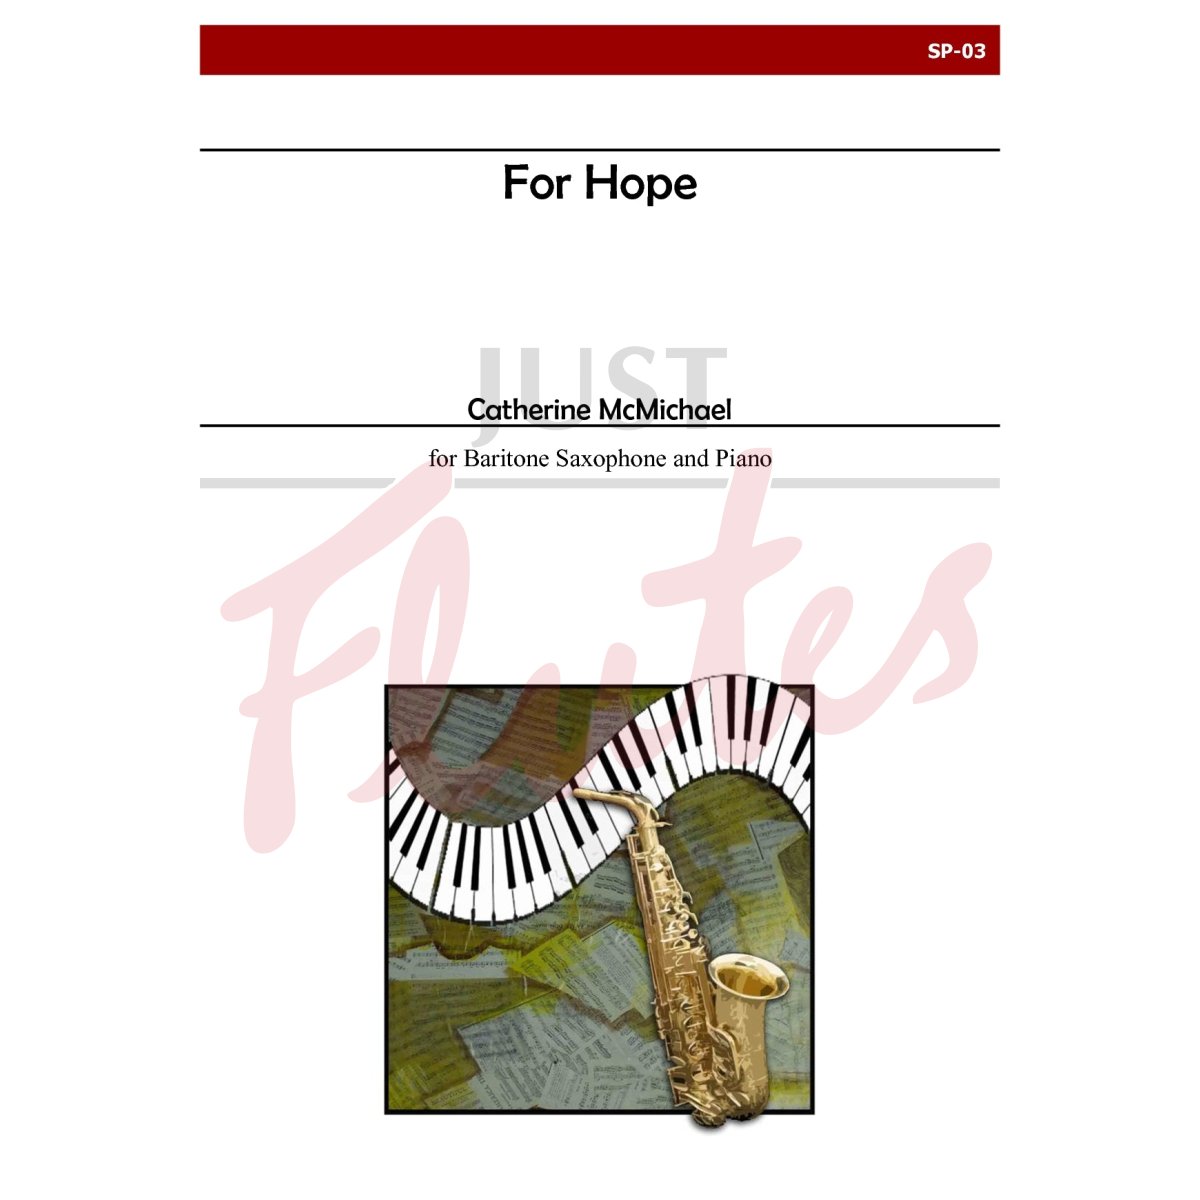 For Hope for Baritone Saxophone and Piano